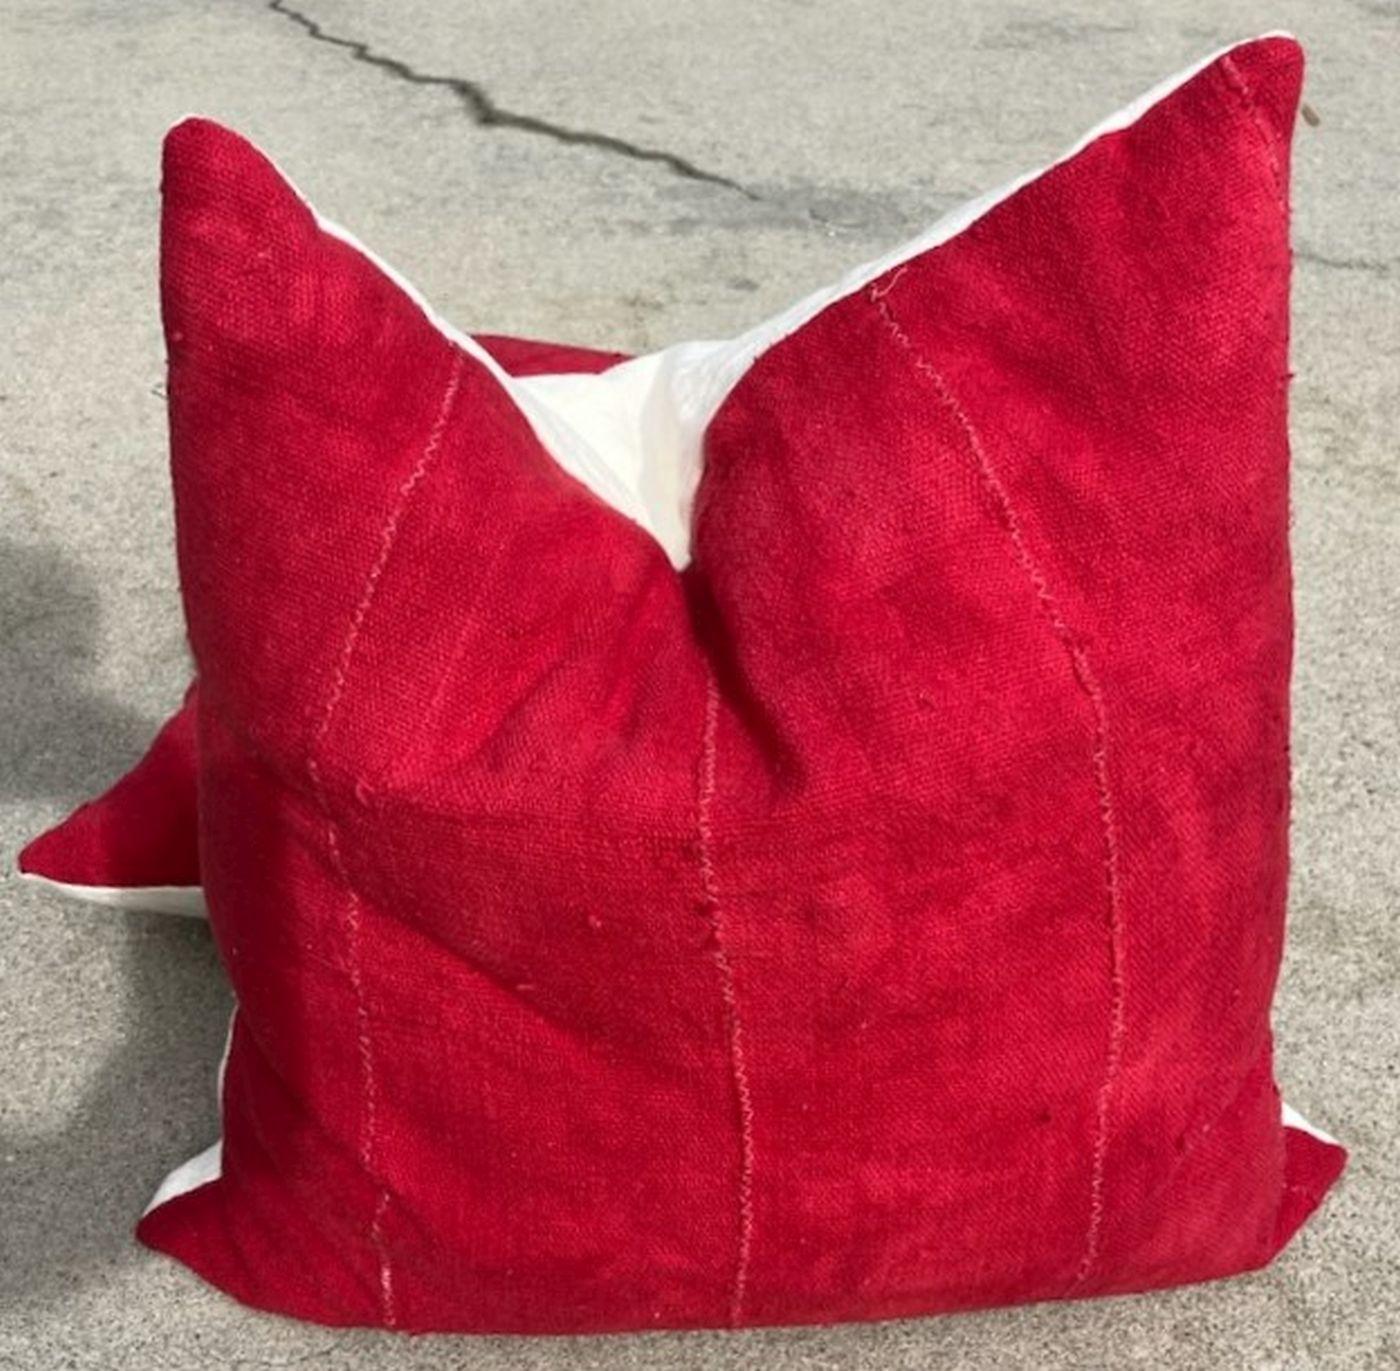 Adirondack 19Thc Red Vintage Linen Pillows -Pair For Sale